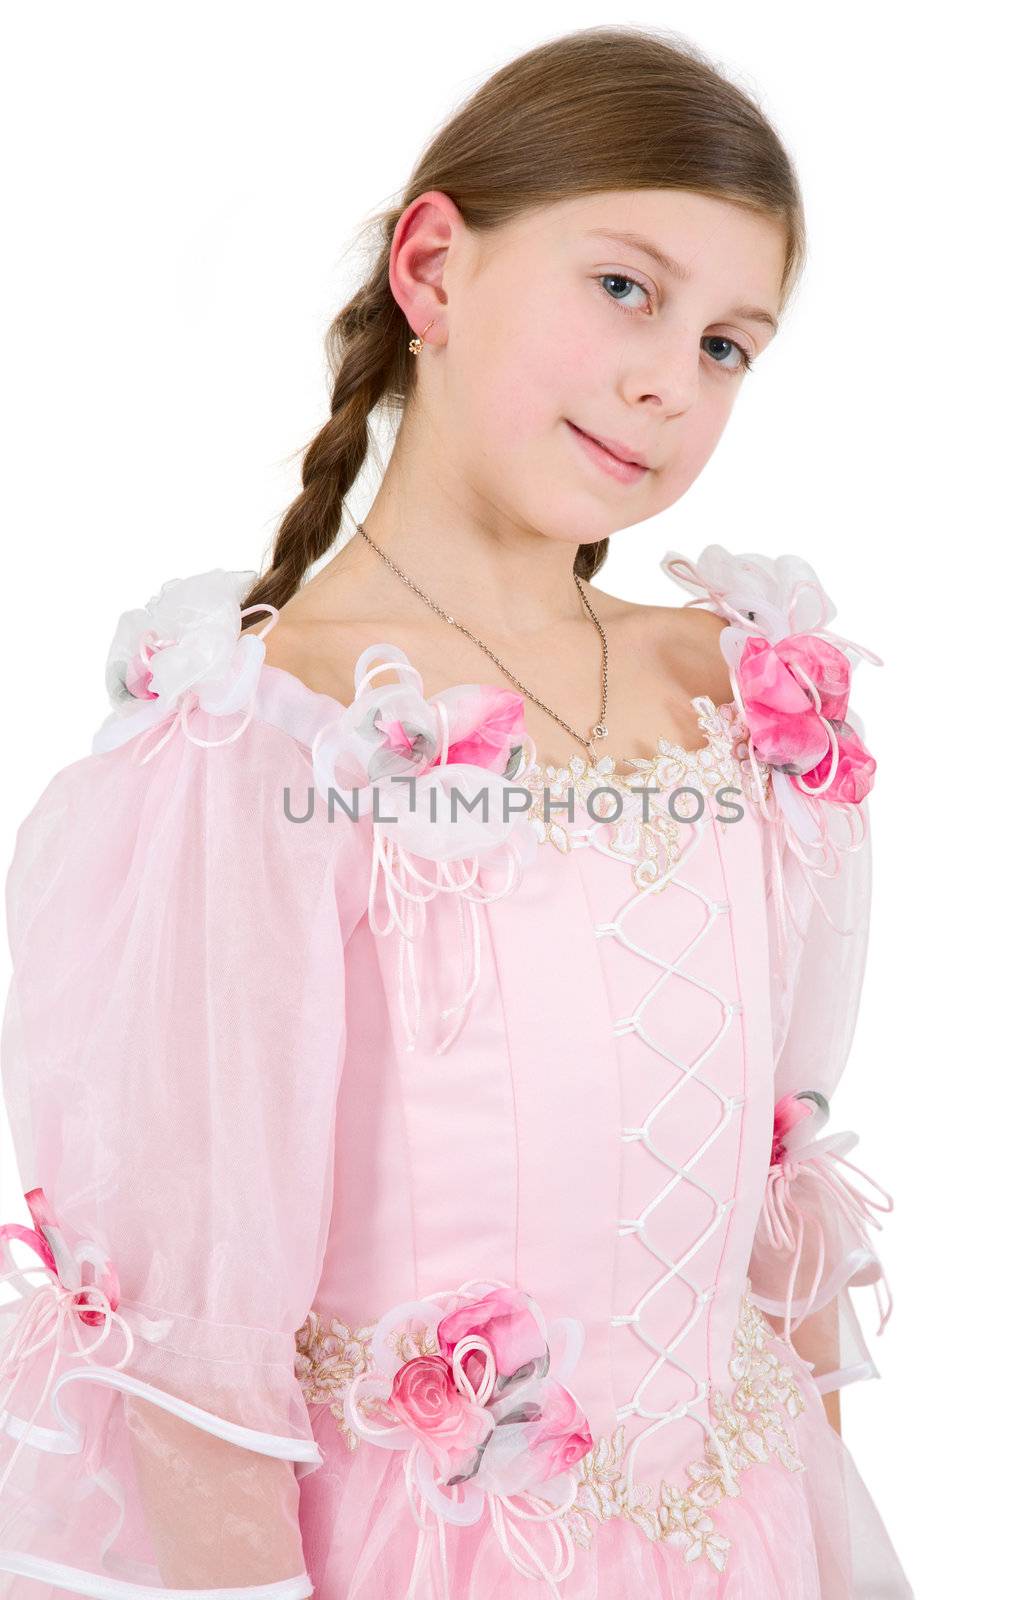 Girl in pinkish dress on a white background